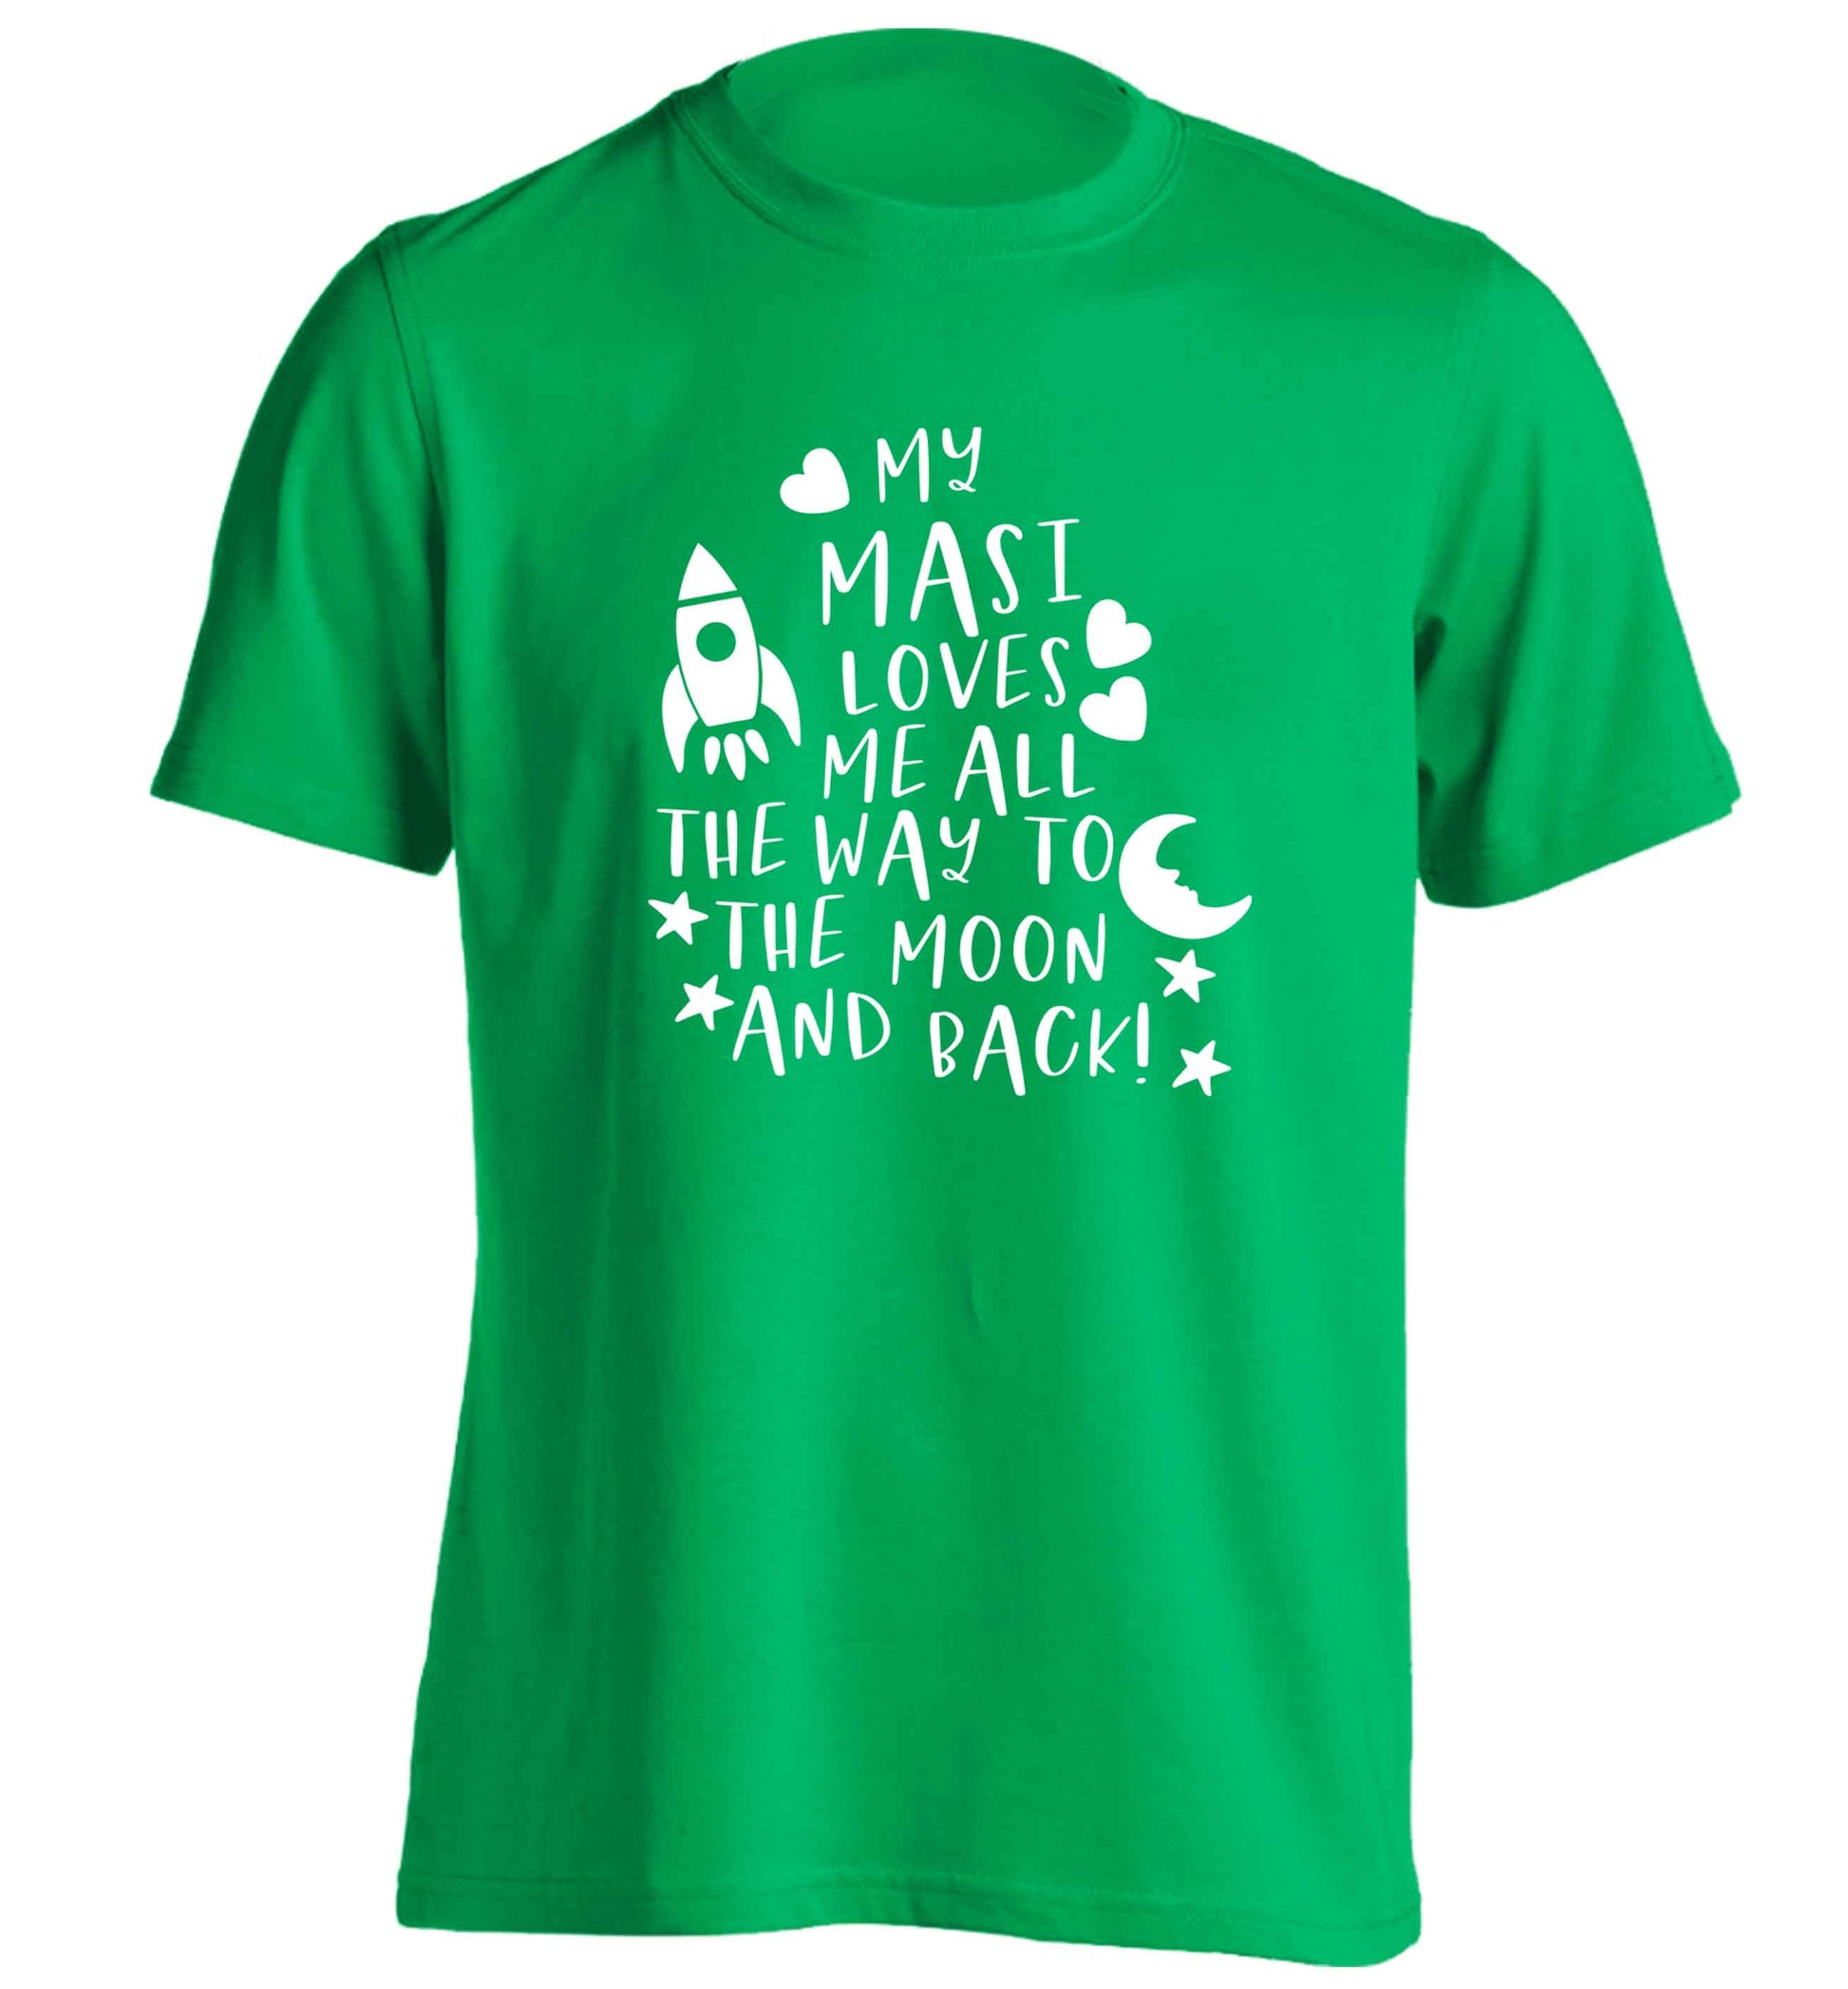 My masi loves me all the way to the moon and back adults unisex green Tshirt 2XL